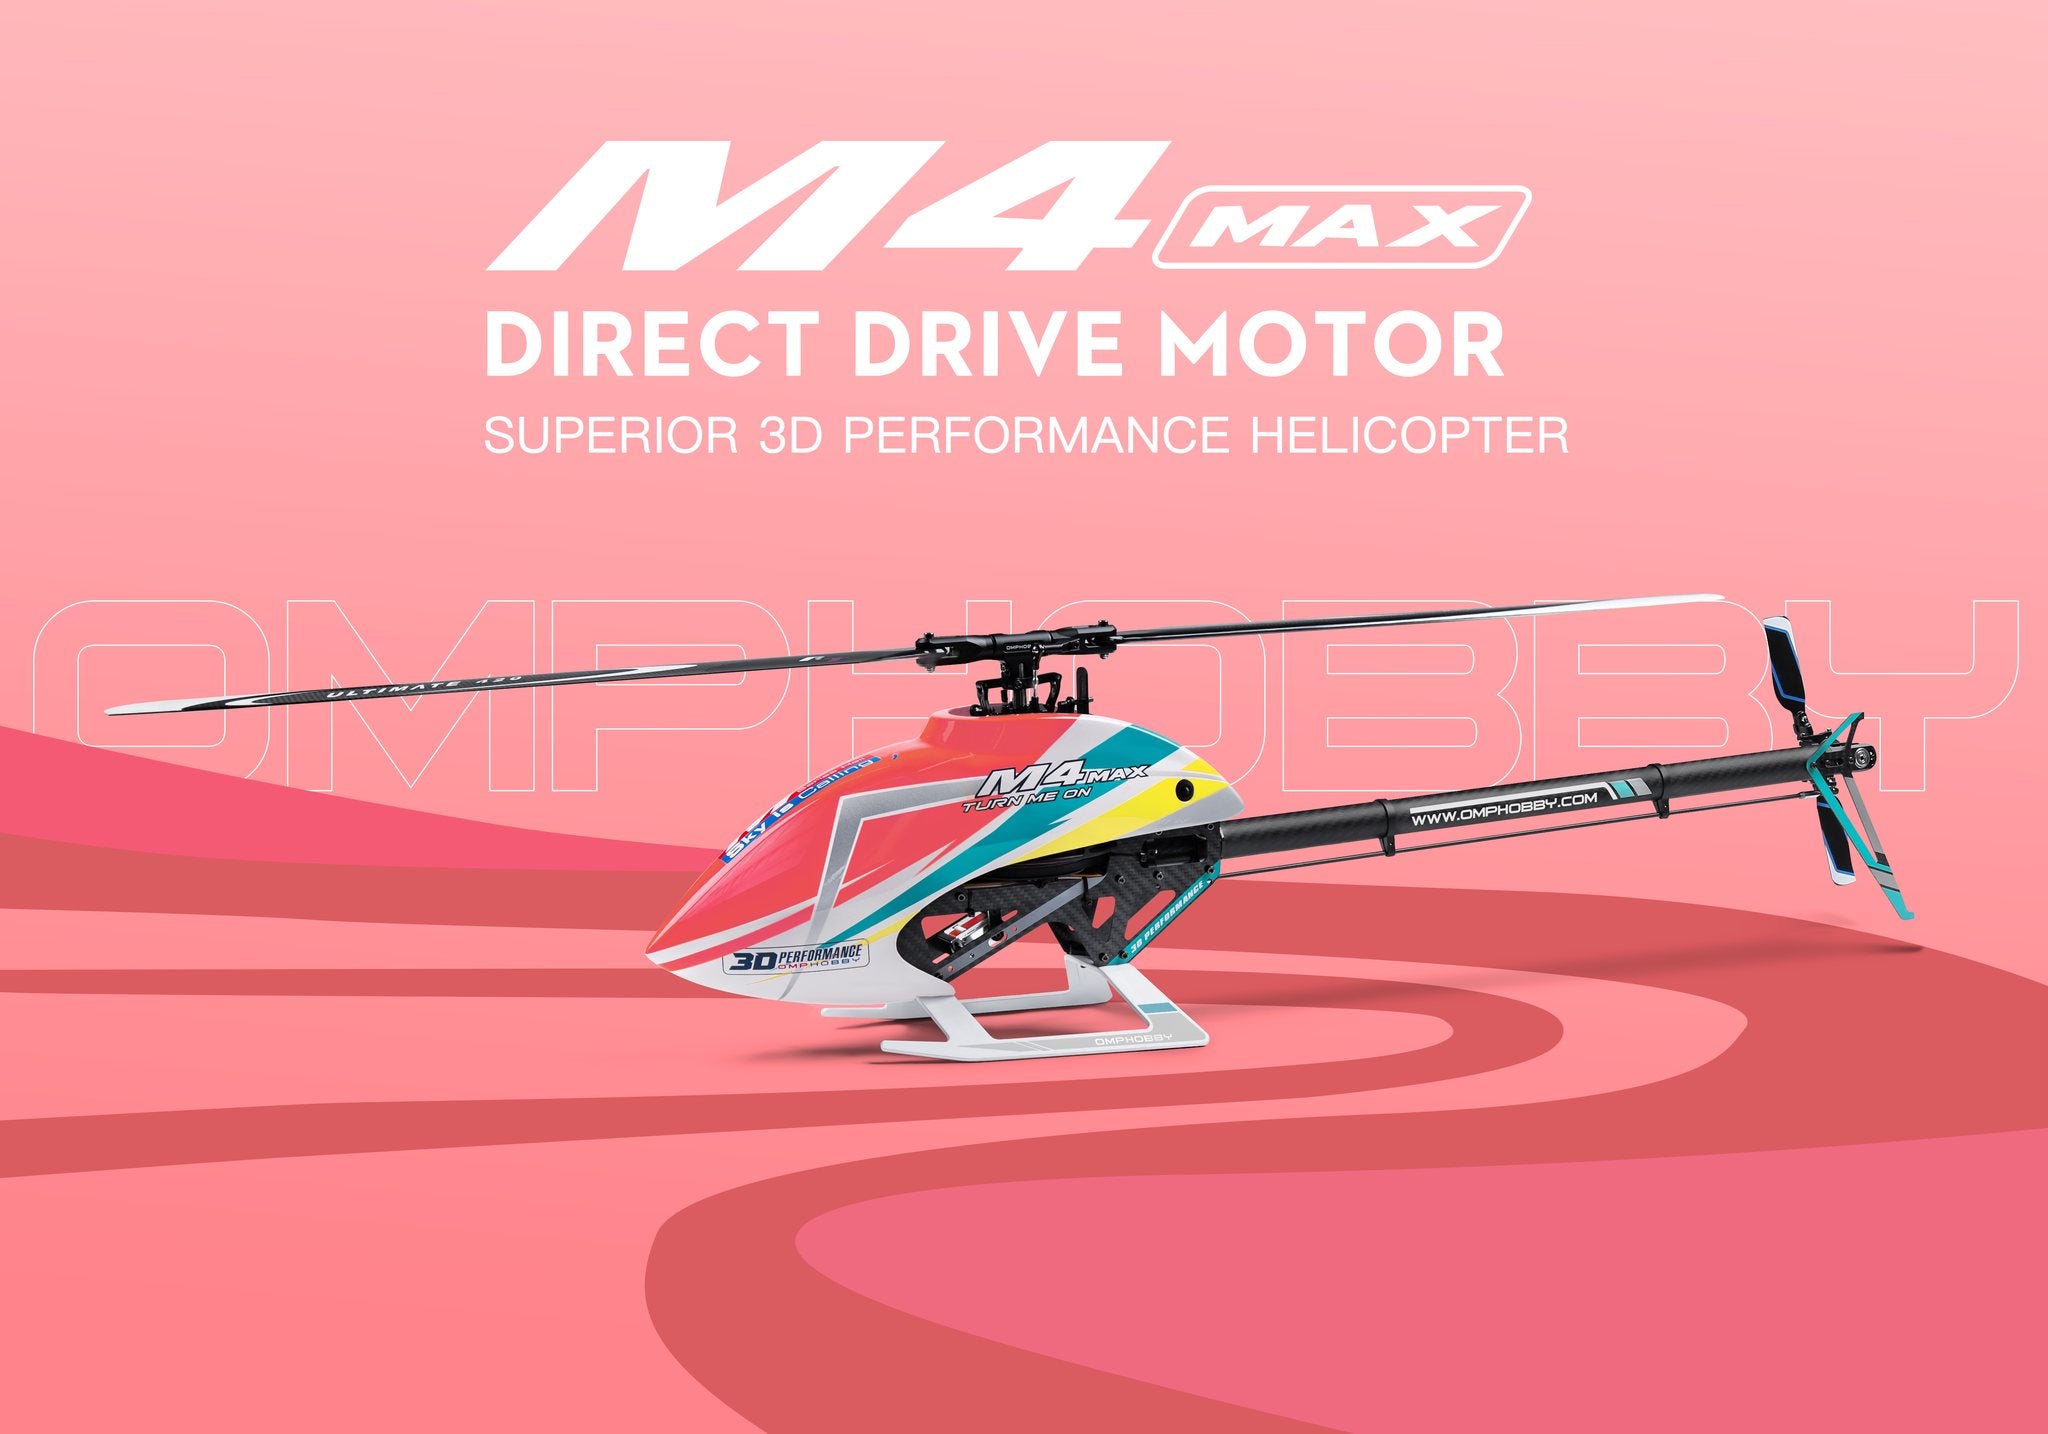 OMPHobby M4 Max RC Helicopter Frame and Motor Kit